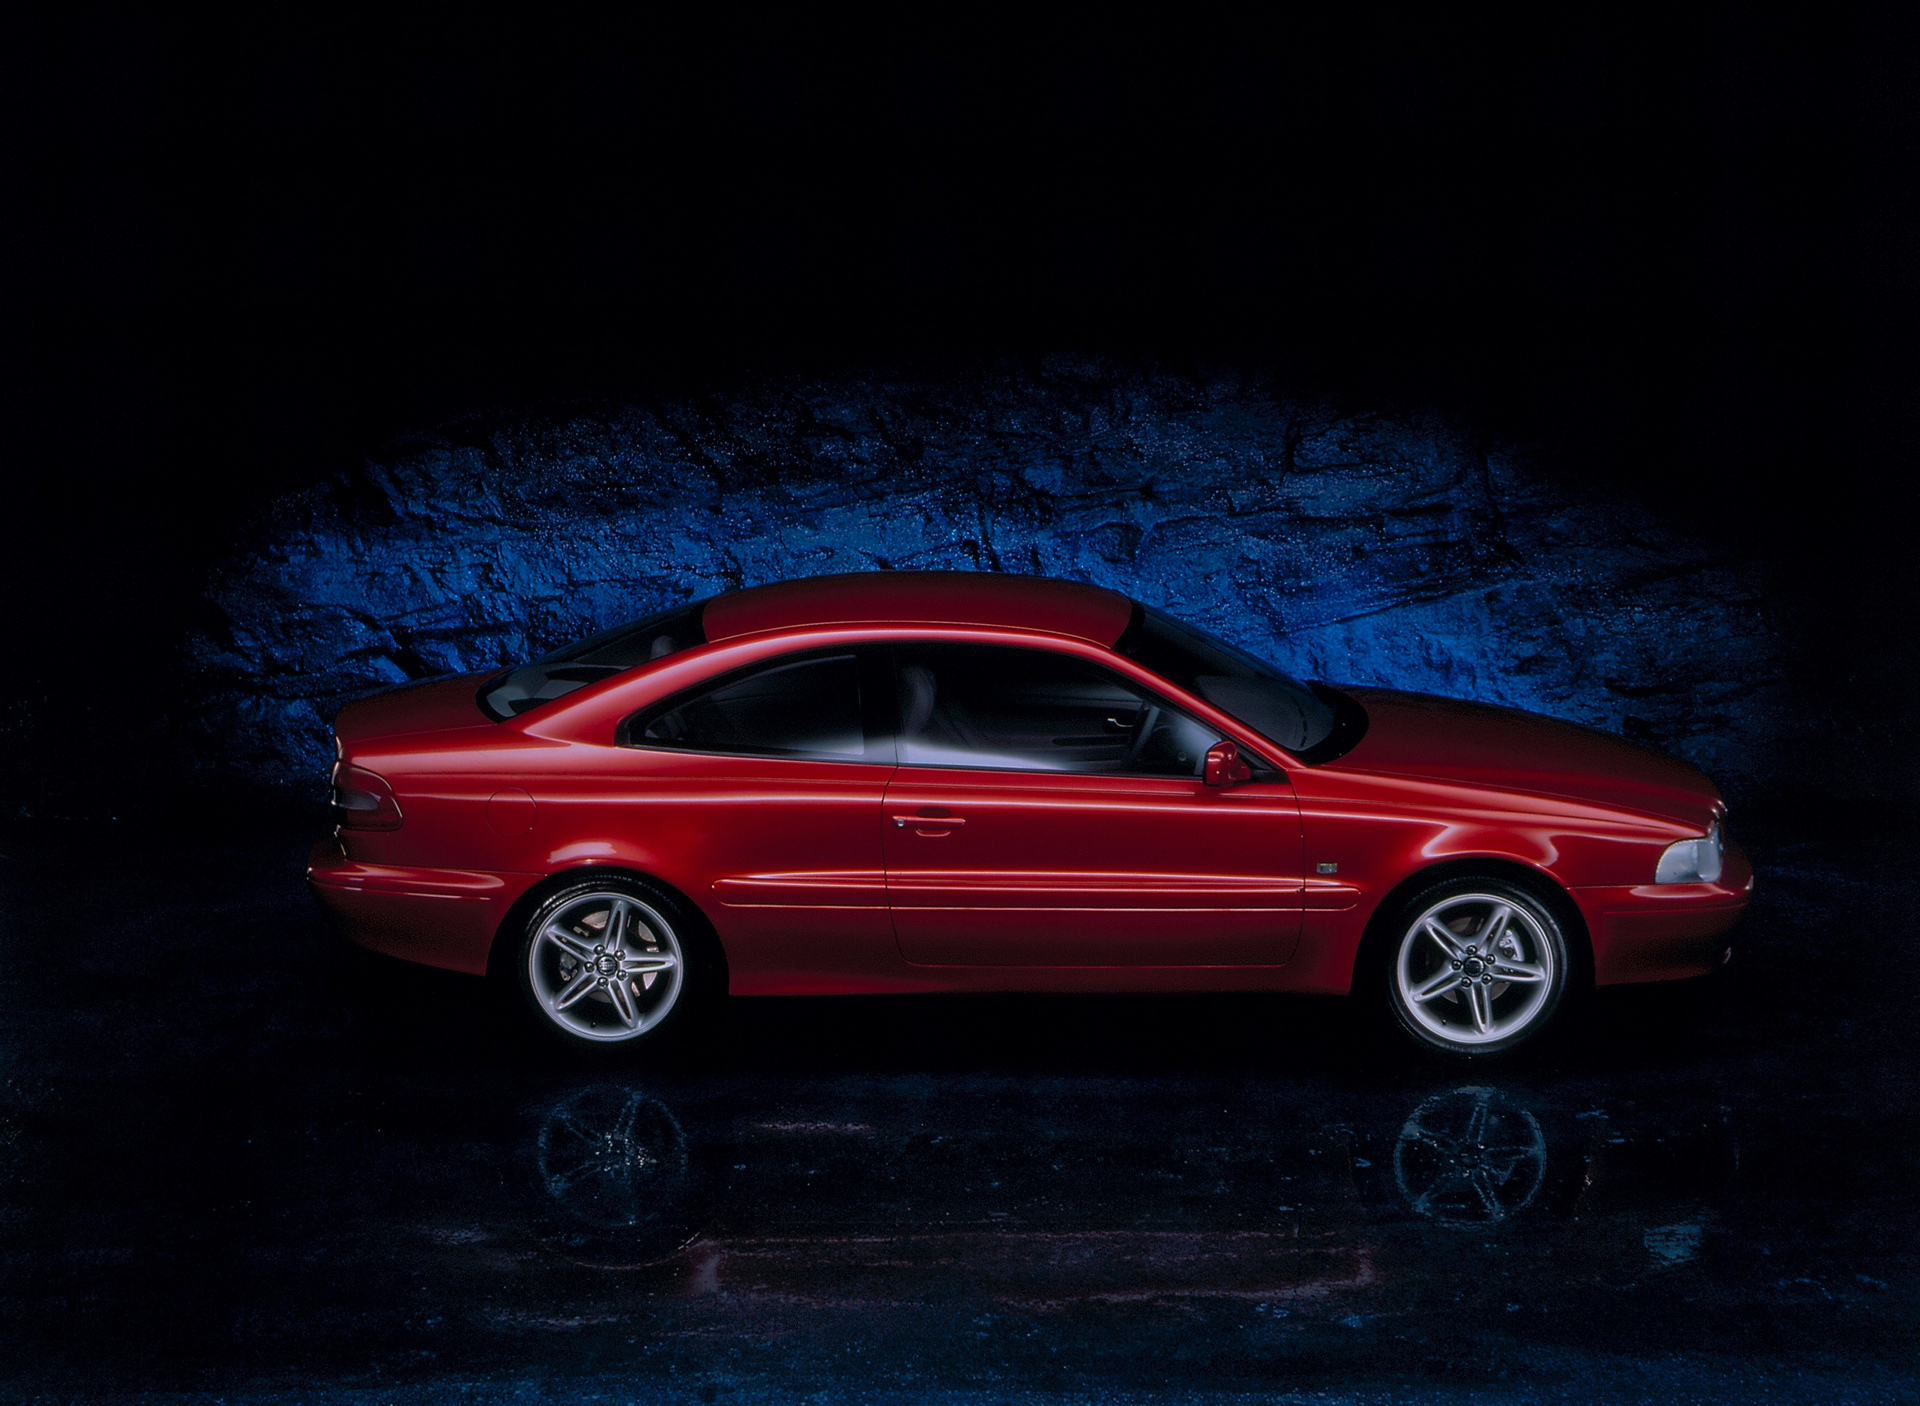 Volvo C70 Coupé © Zhejiang Geely Holding Group Co., Ltd